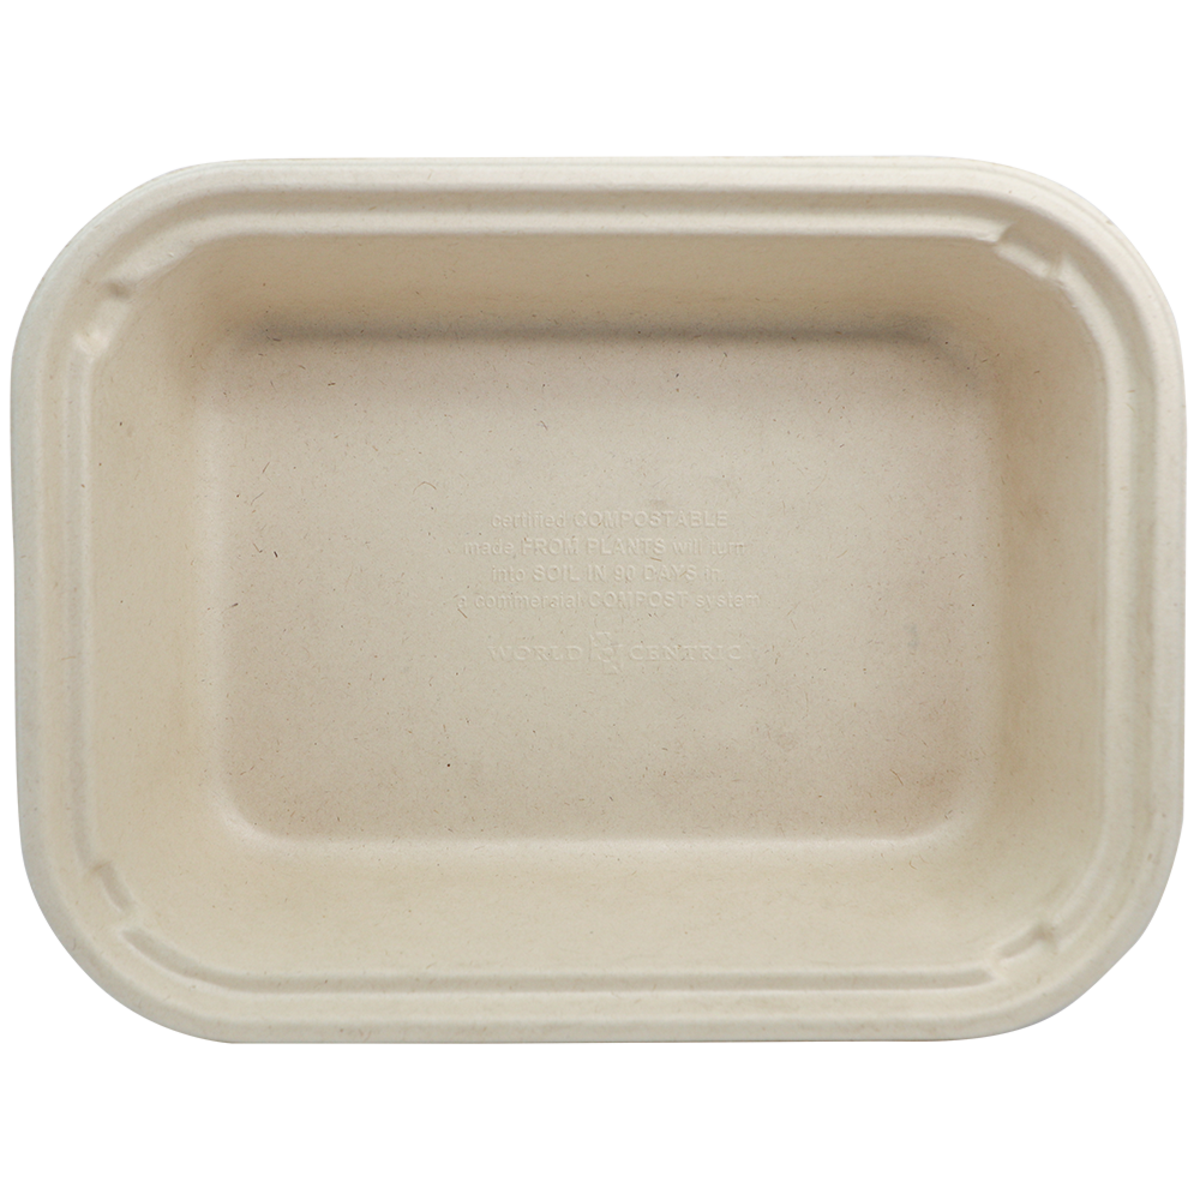 32 oz Compostable Containers with Lids, 5 count, World Centric